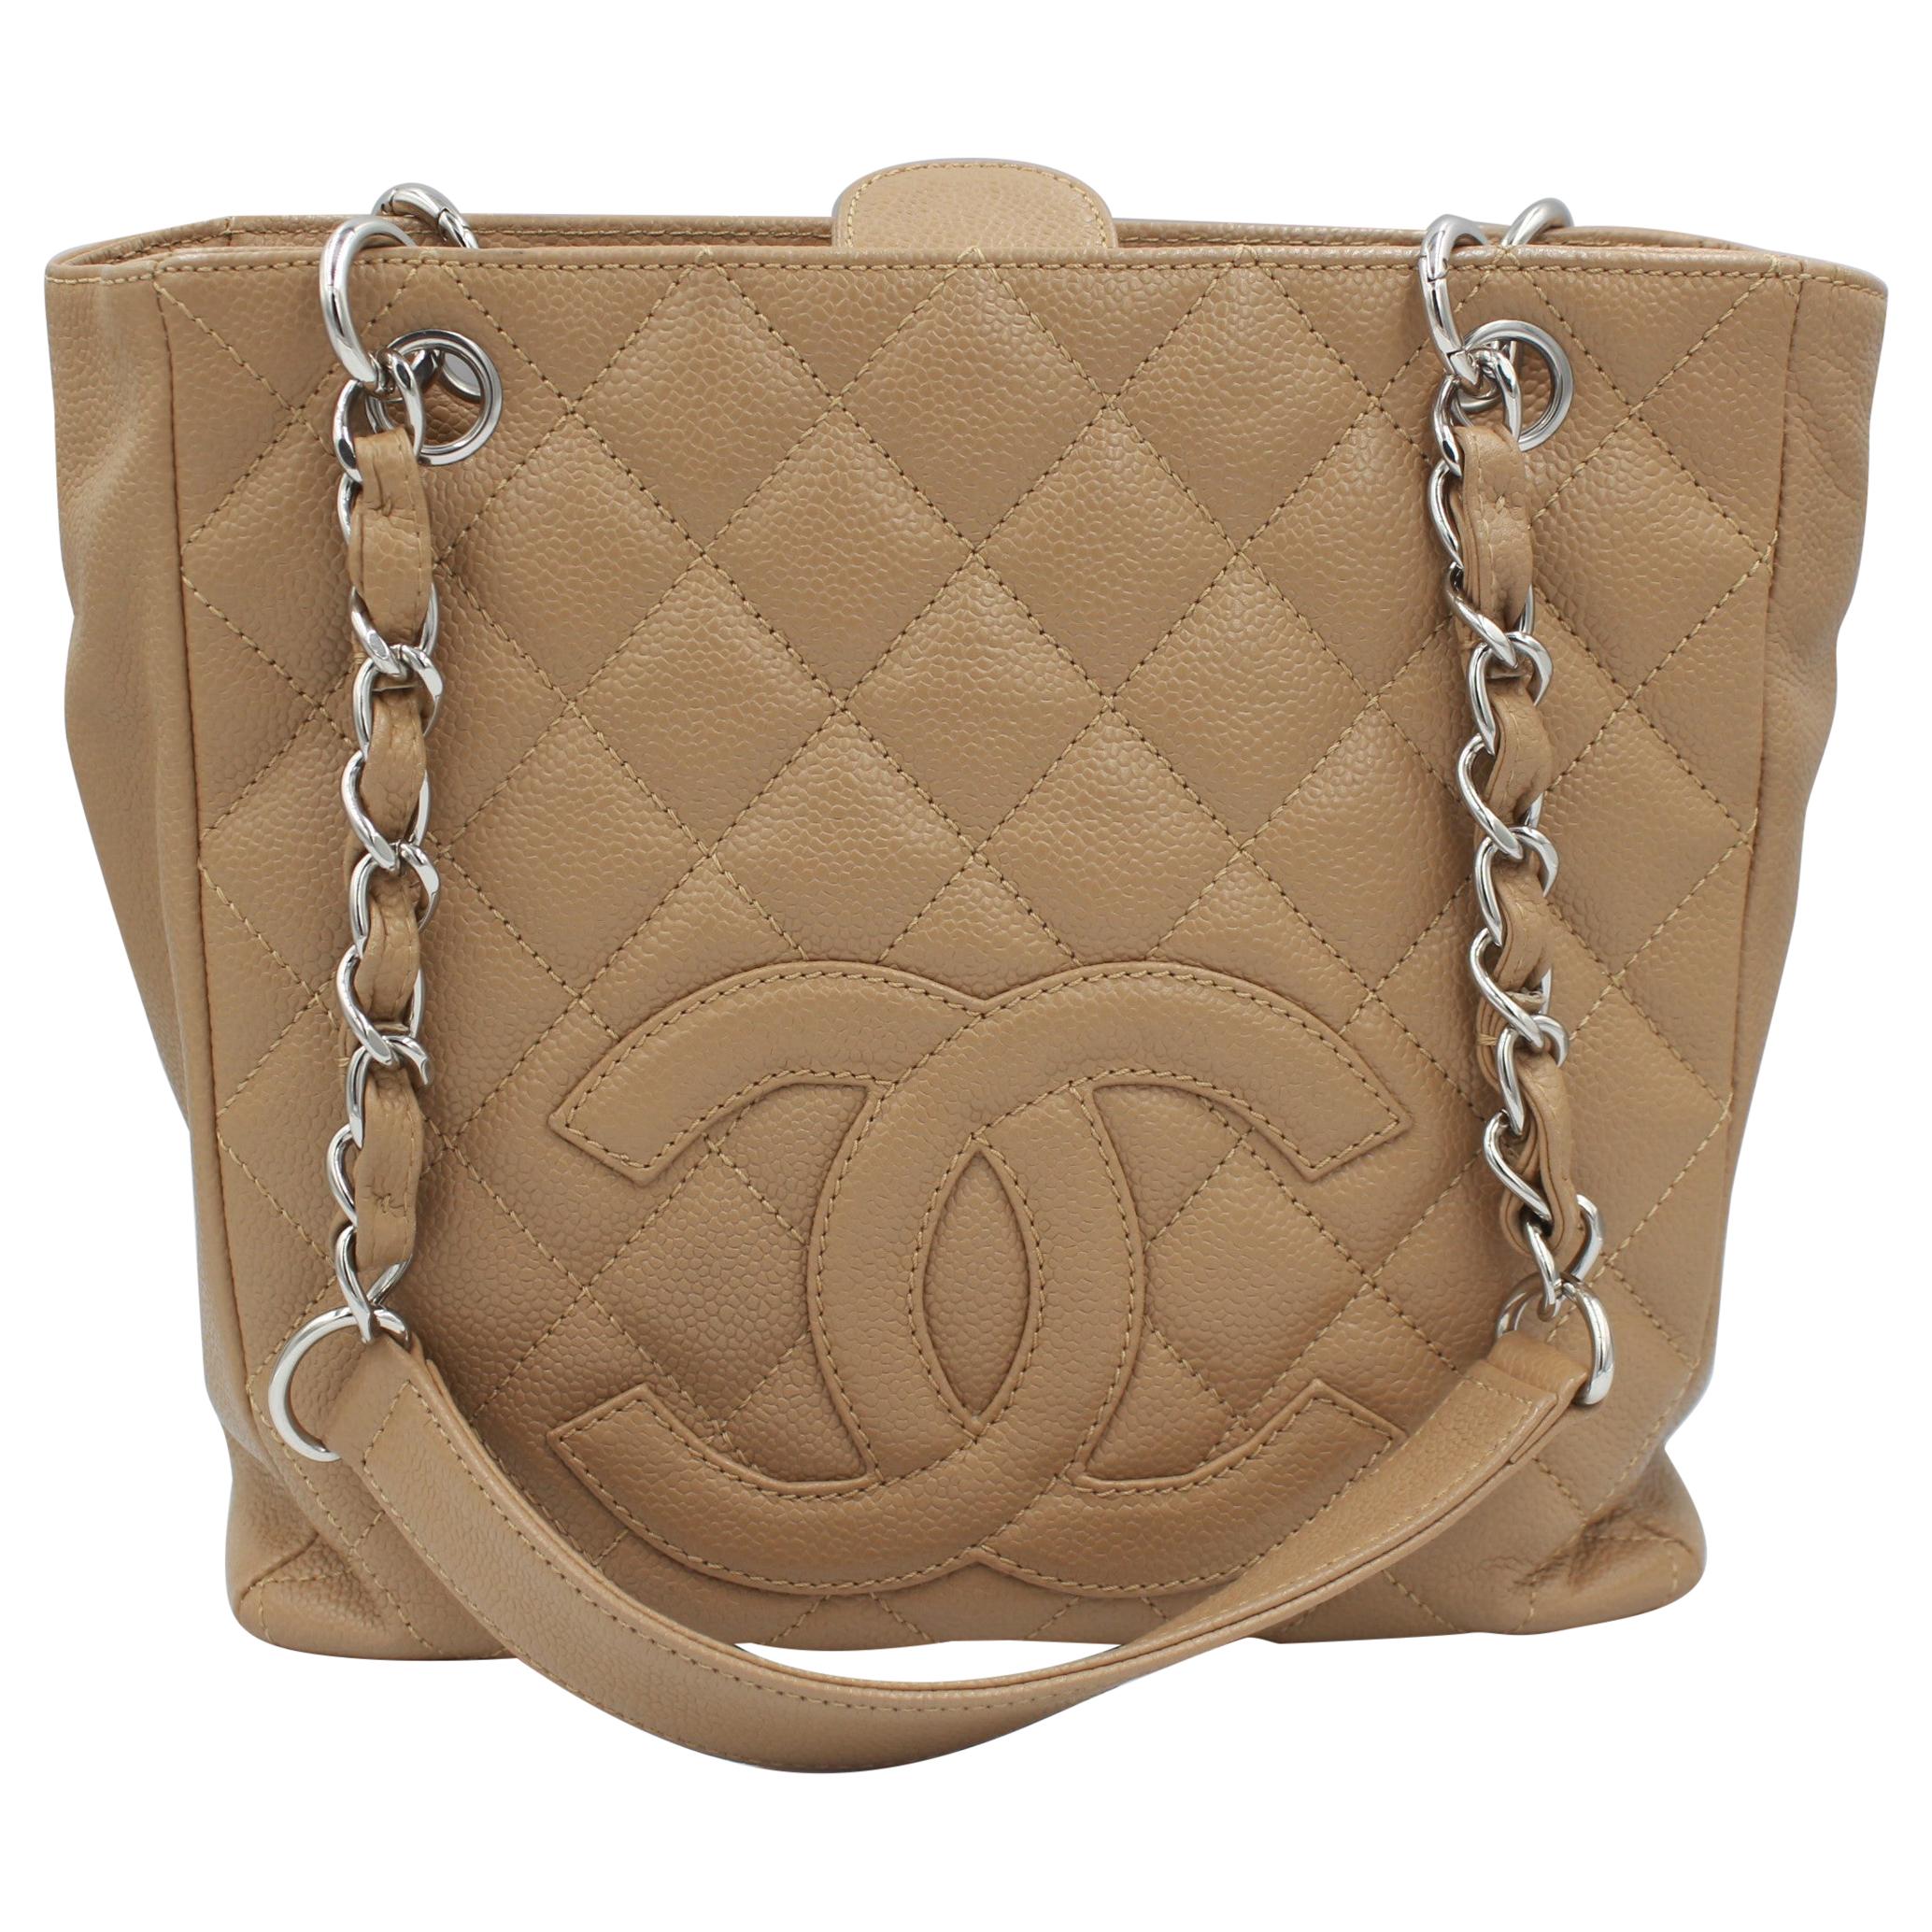 Chanel bag in beige leather For Sale